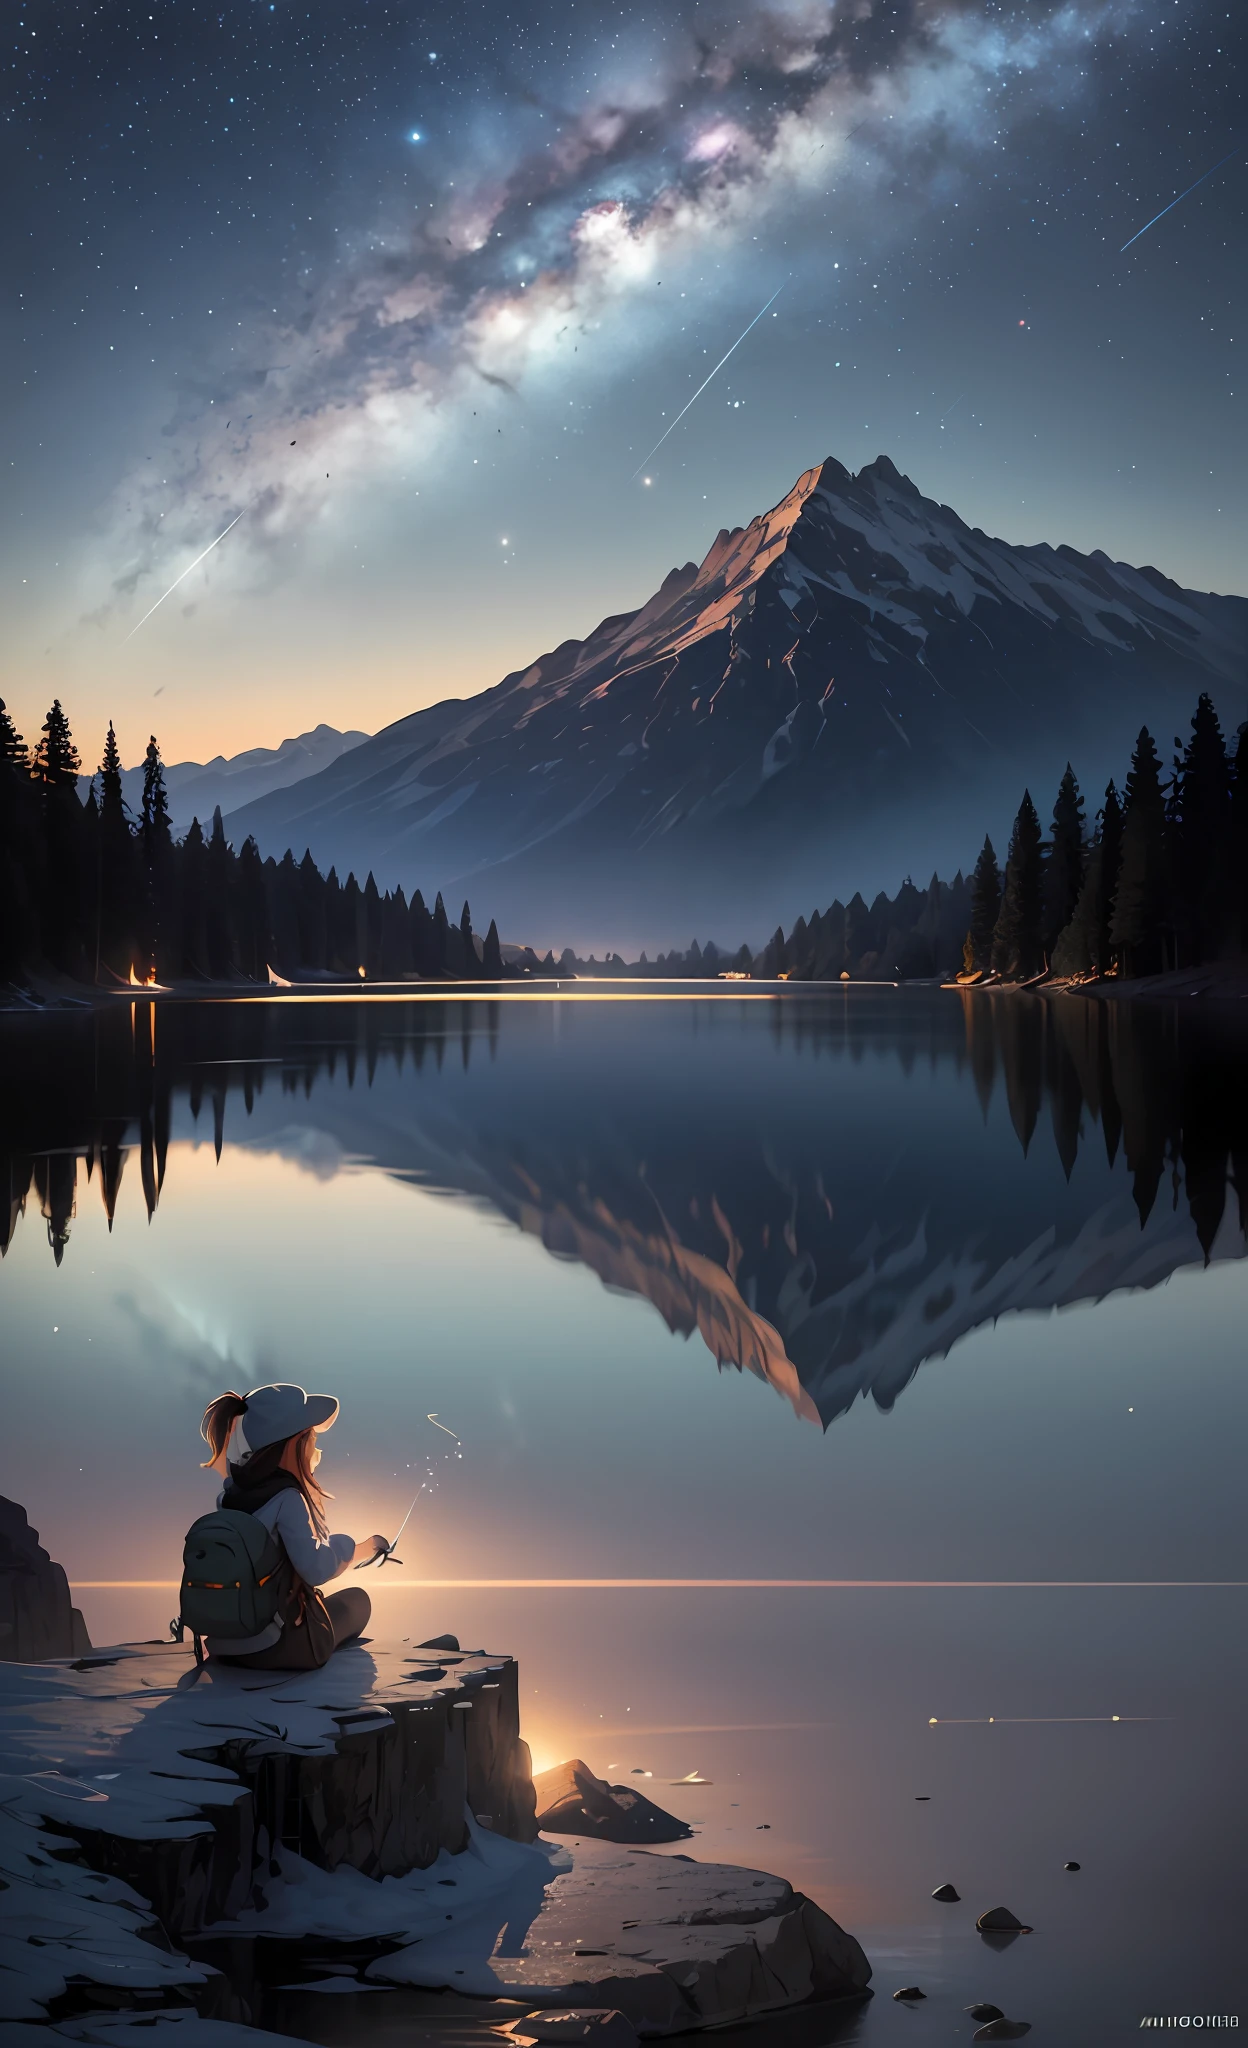 masterpiece, best quality, ultra-detailed, illustration, 1girl, solo, outdoors, camping, night, mountains, nature, stars, moon, bonfire, tent, twin ponytails, green eyes, cheerful, happy, backpack, sleeping bag, camping stove, water bottle, mountain boots, gloves, sweater, hat, flashlight, forest, rocks, river, wood, smoke, shadows, contrast, clear sky, constellations, Milky Way, peaceful, serene, quiet, tranquil, remote, secluded, adventurous, exploration, escape, independence, survival, resourcefulness, challenge, perseverance, stamina, endurance, observation, intuition, adaptability, creativity, imagination, artistry, inspiration, beauty, awe, wonder, gratitude, appreciation, relaxation, enjoyment, rejuvenation, mindfulness, awareness, connection, harmony, balance, texture, detail, realism, depth, perspective, composition, color, light, shadow, reflection, refraction, tone, contrast, foreground, middle ground, background, naturalistic, figurative, representational, impressionistic, expressionistic, abstract, innovative, experimental, unique, cinematic